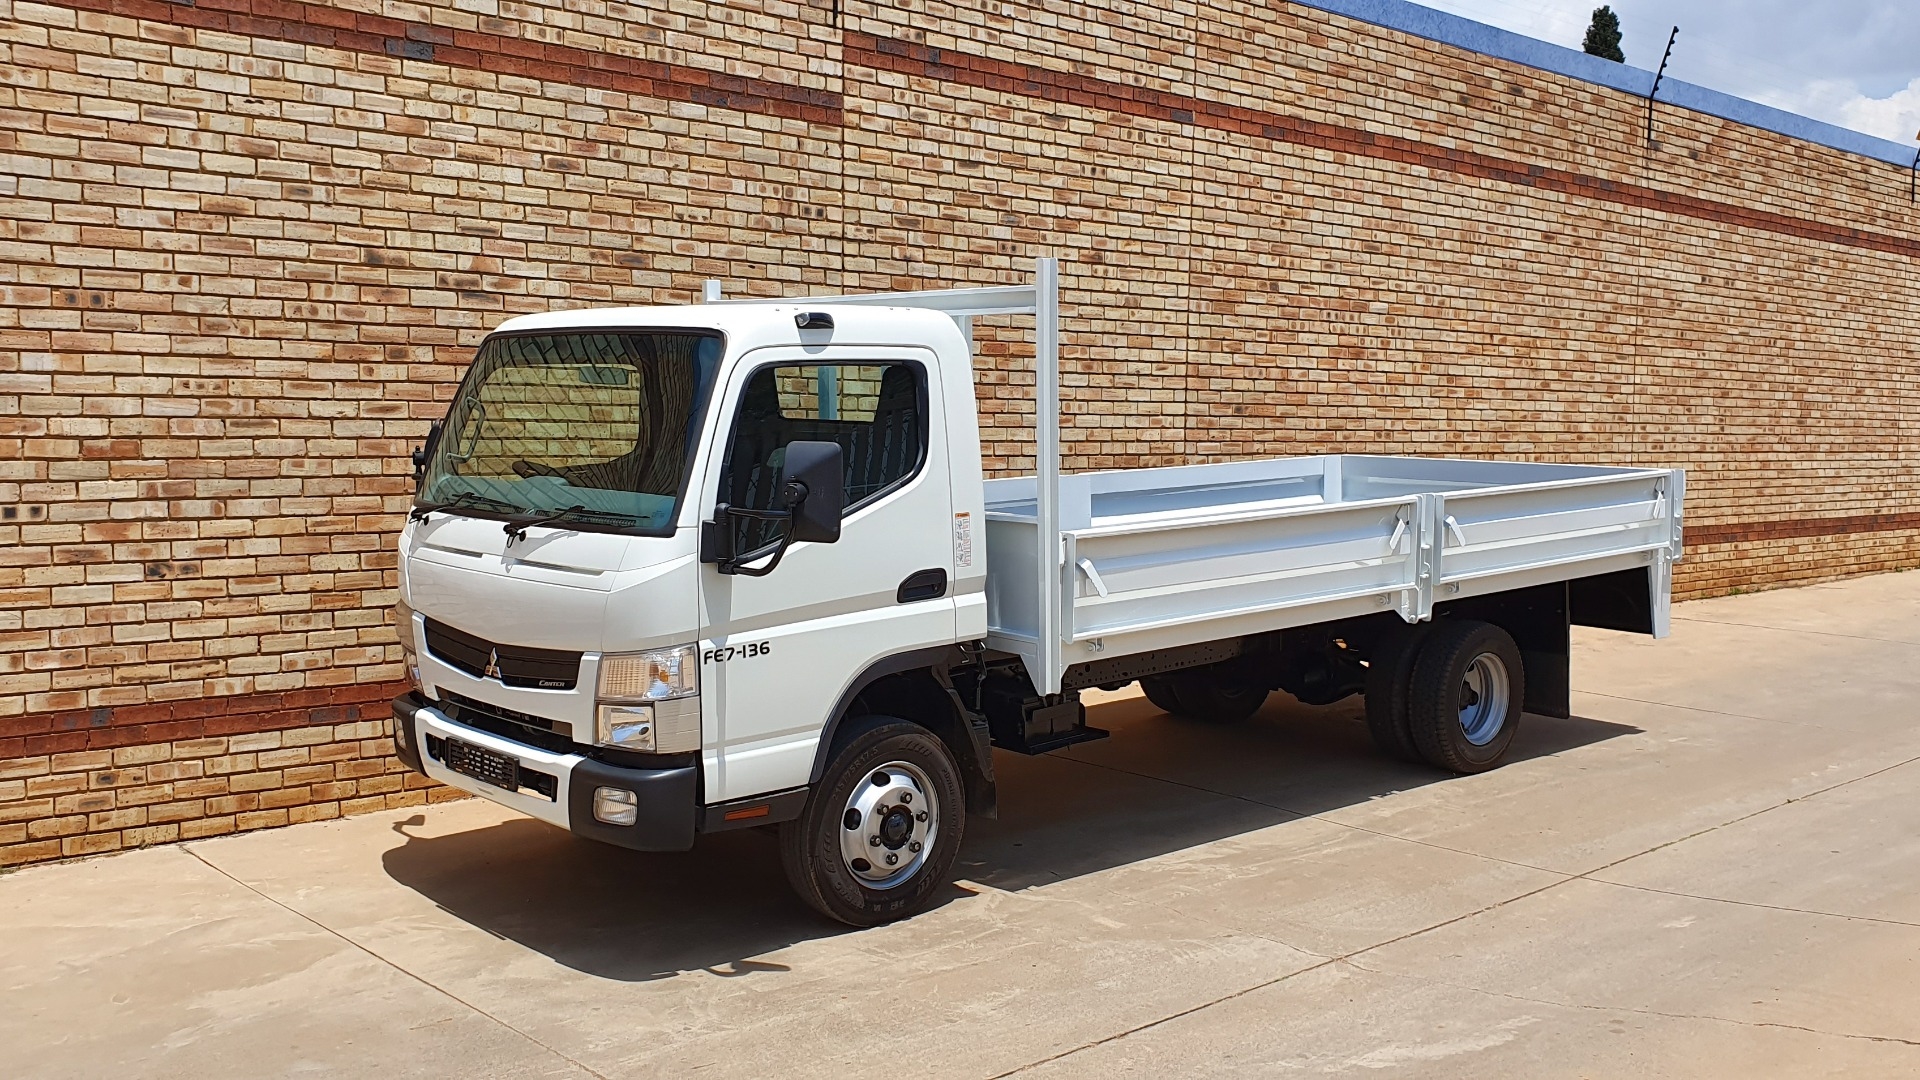 2019 Fuso 7 136,4 TON WITH NEW DROPSIDE BODY,LIKE NEW